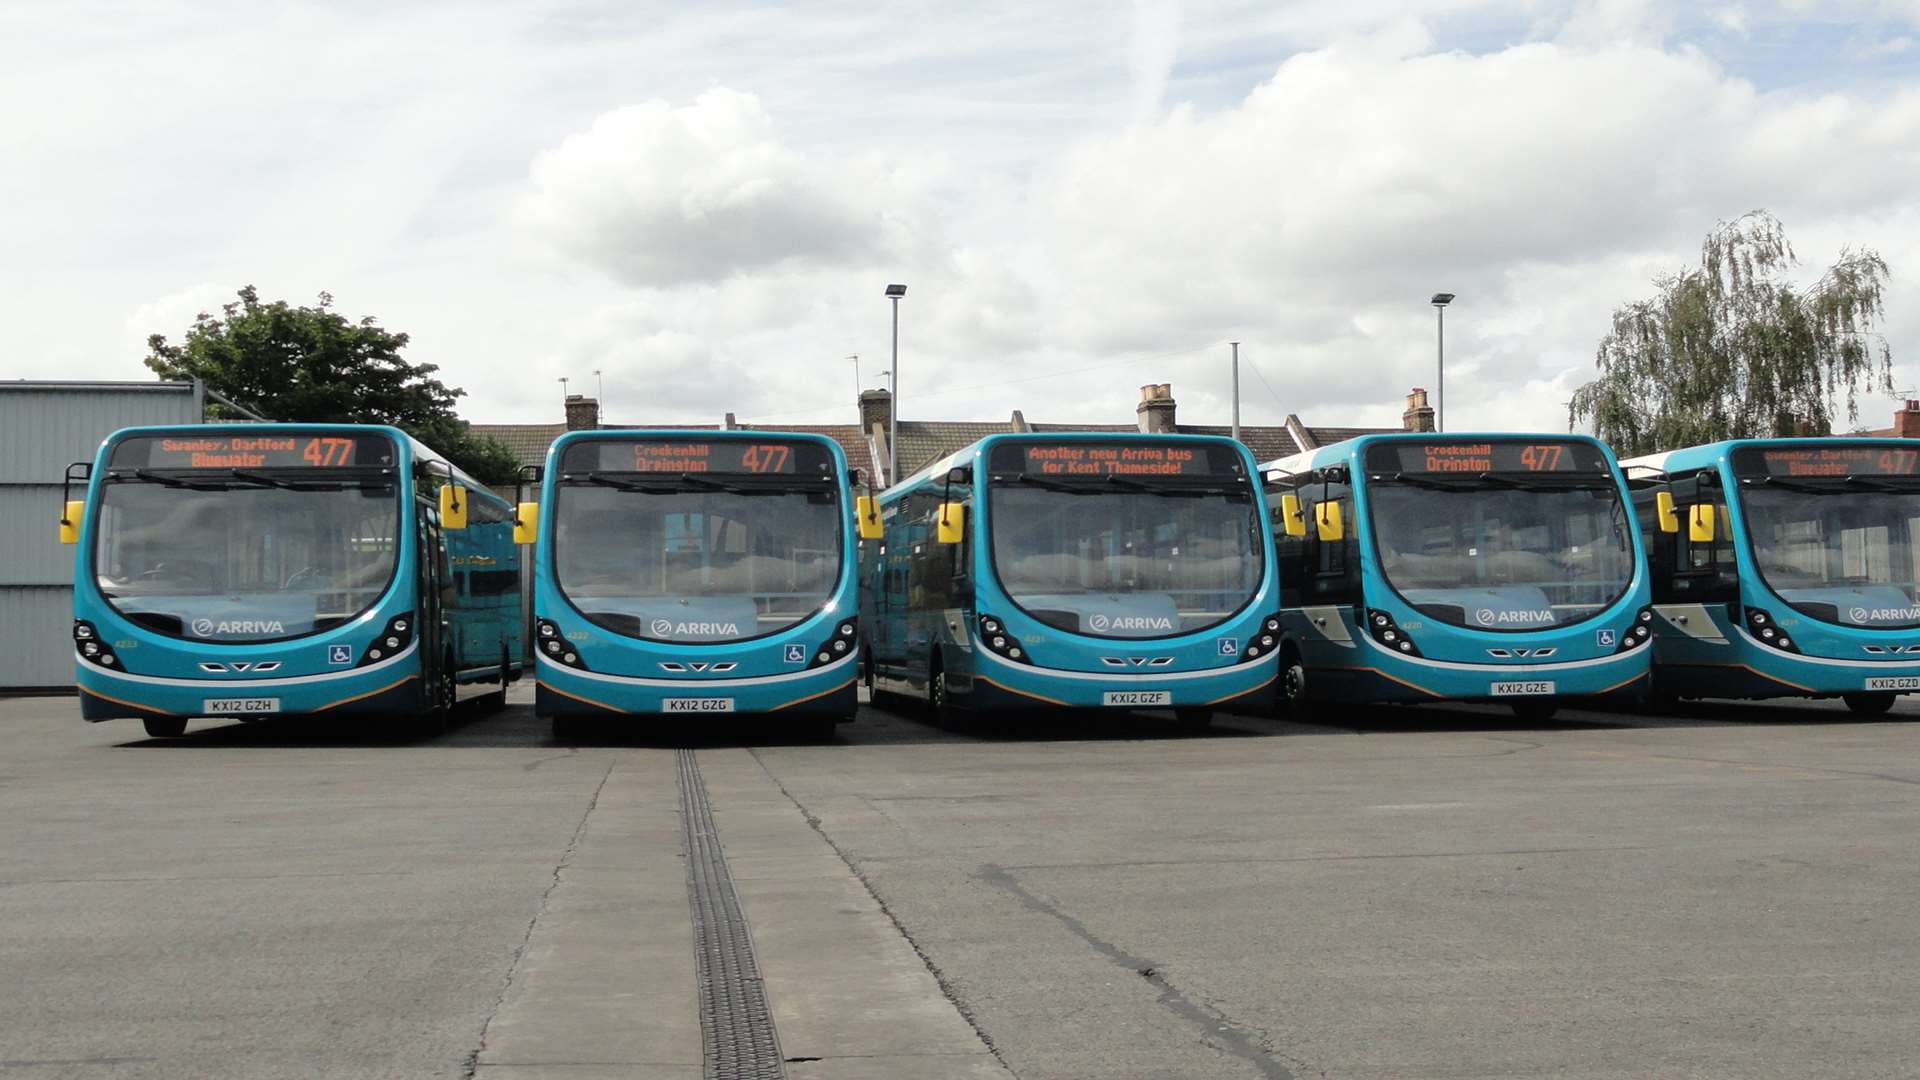 The Arriva Sunday timetable has been altered